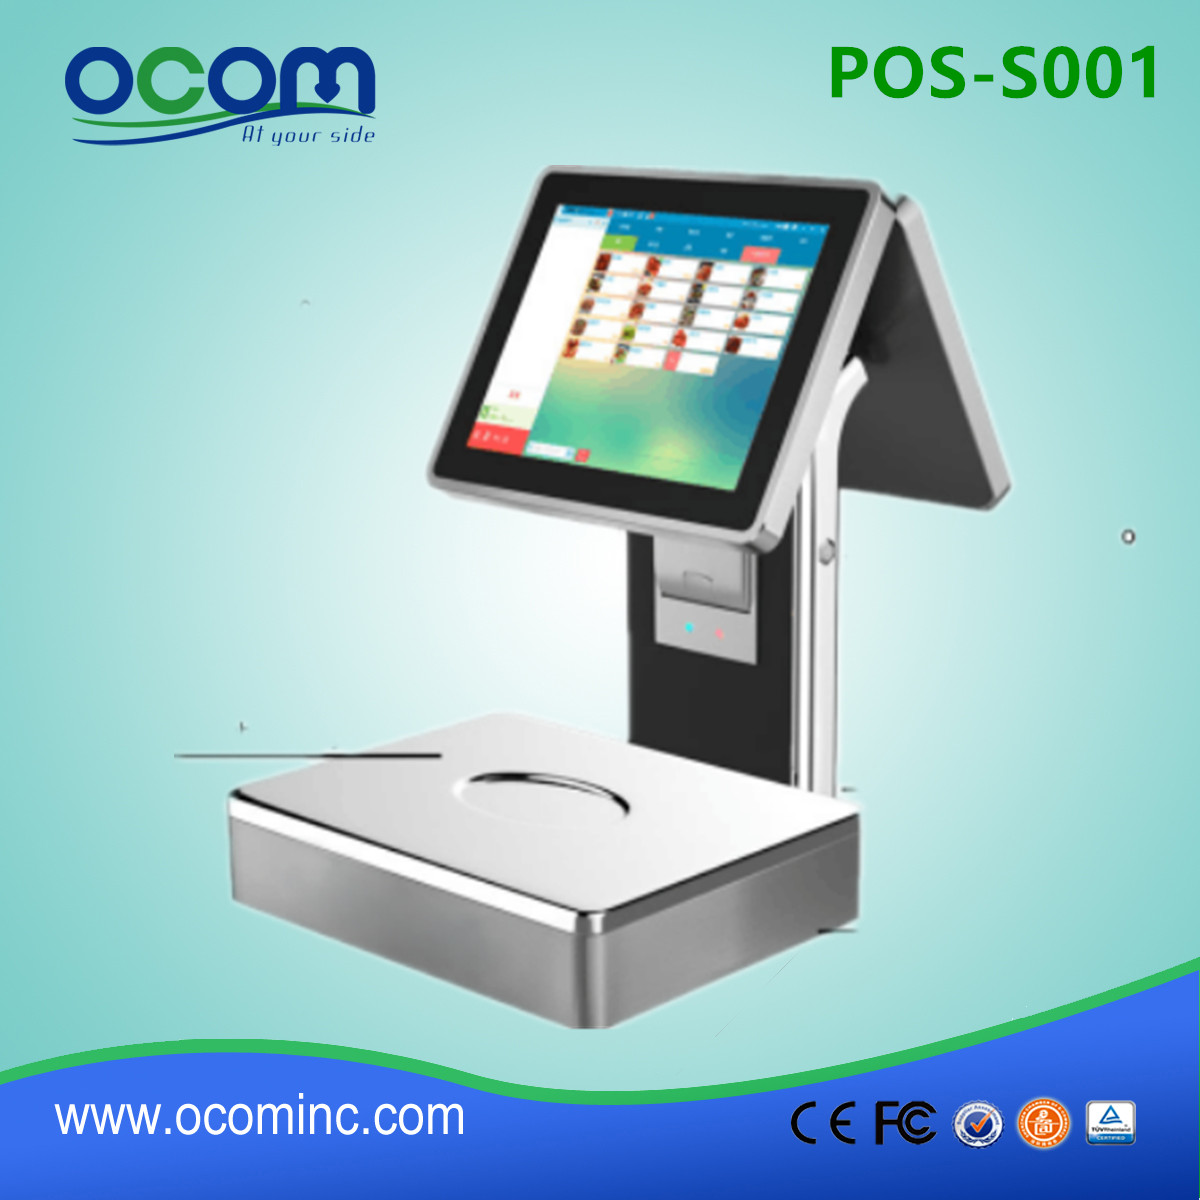 POS-S001-Windows all ine one dual screen POS Scale with printer